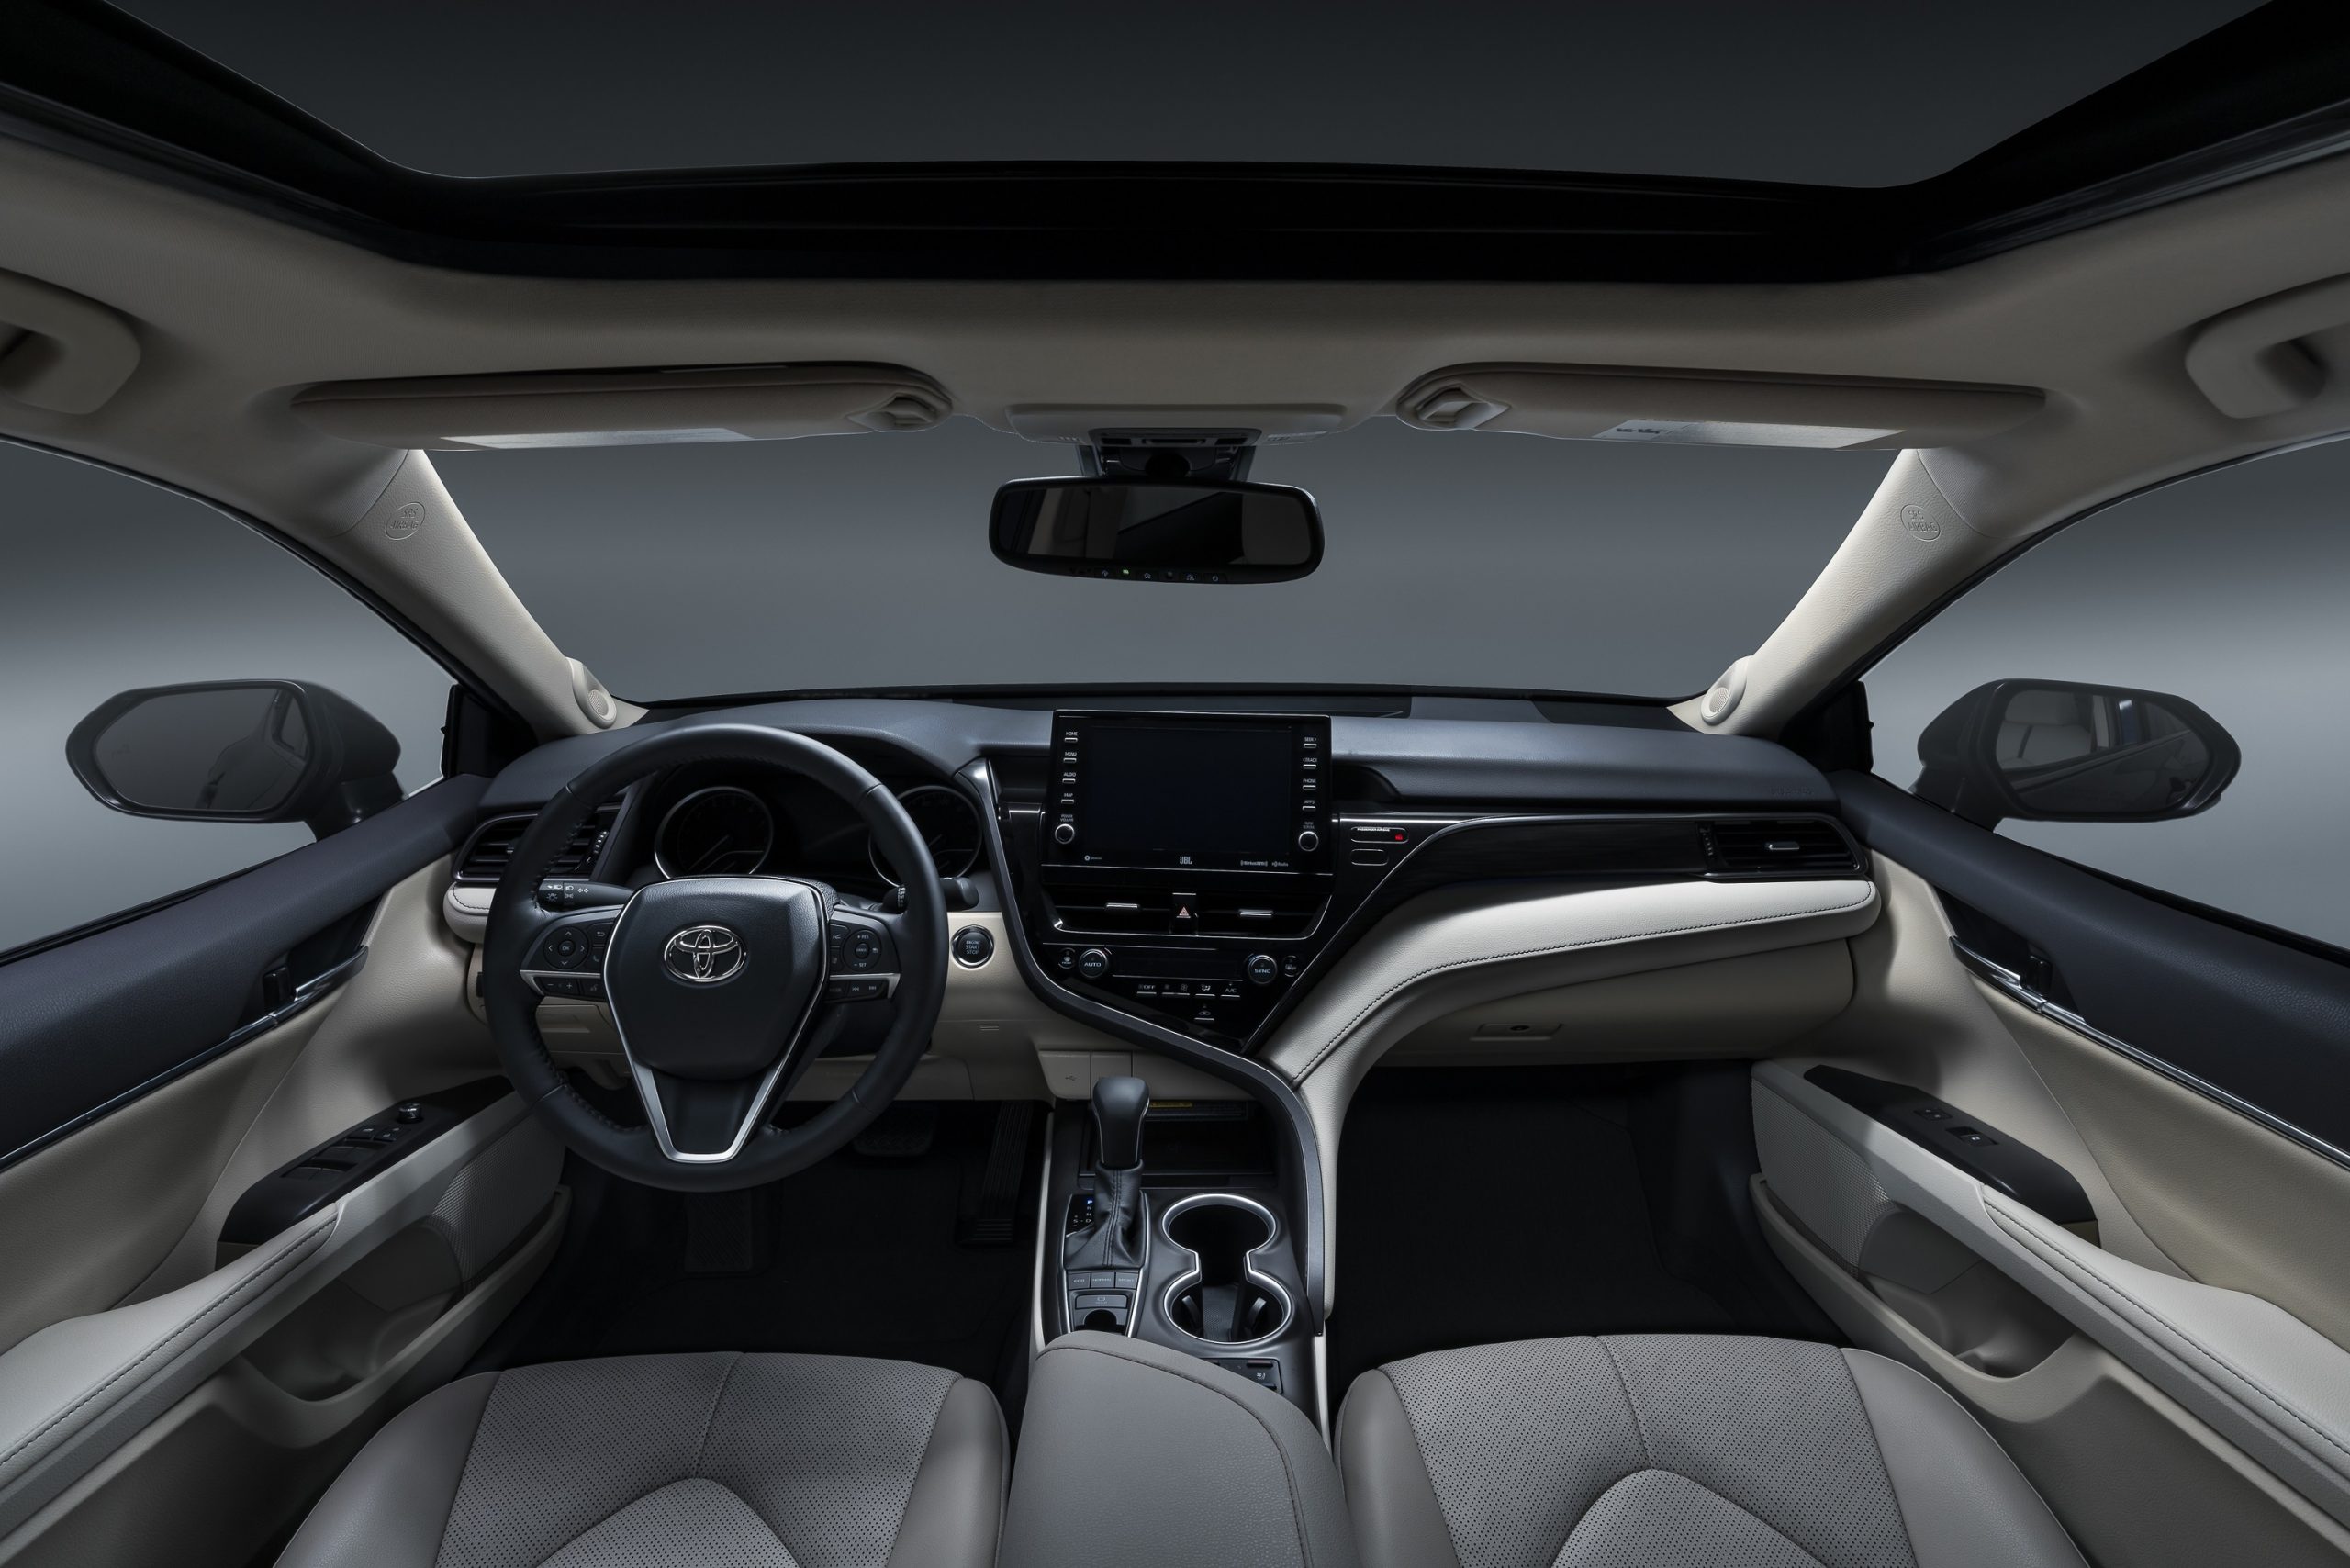 The tan interior of the 2022 Camry shot from the center console